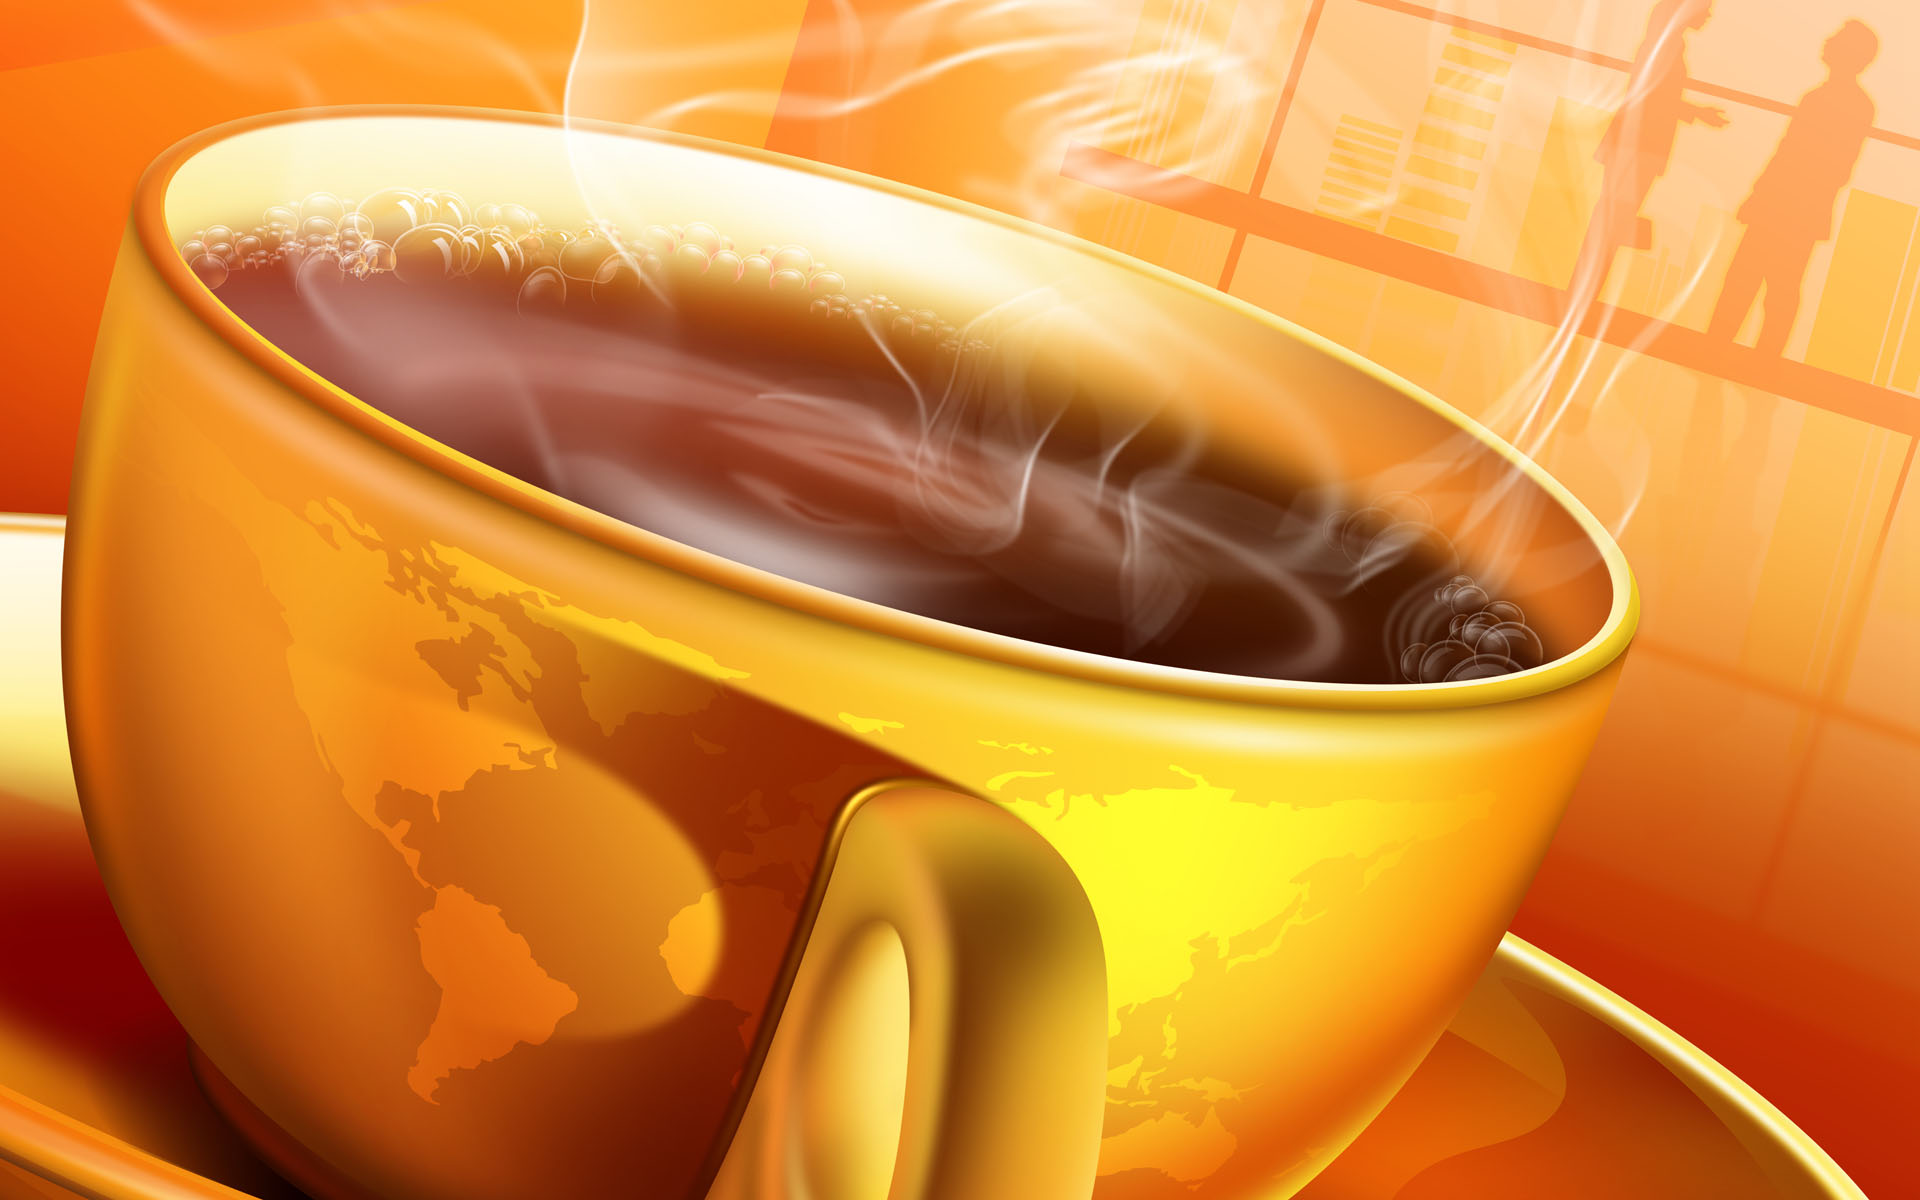 World Coffee: A cup of coffee on a backdrop showing the Earth.